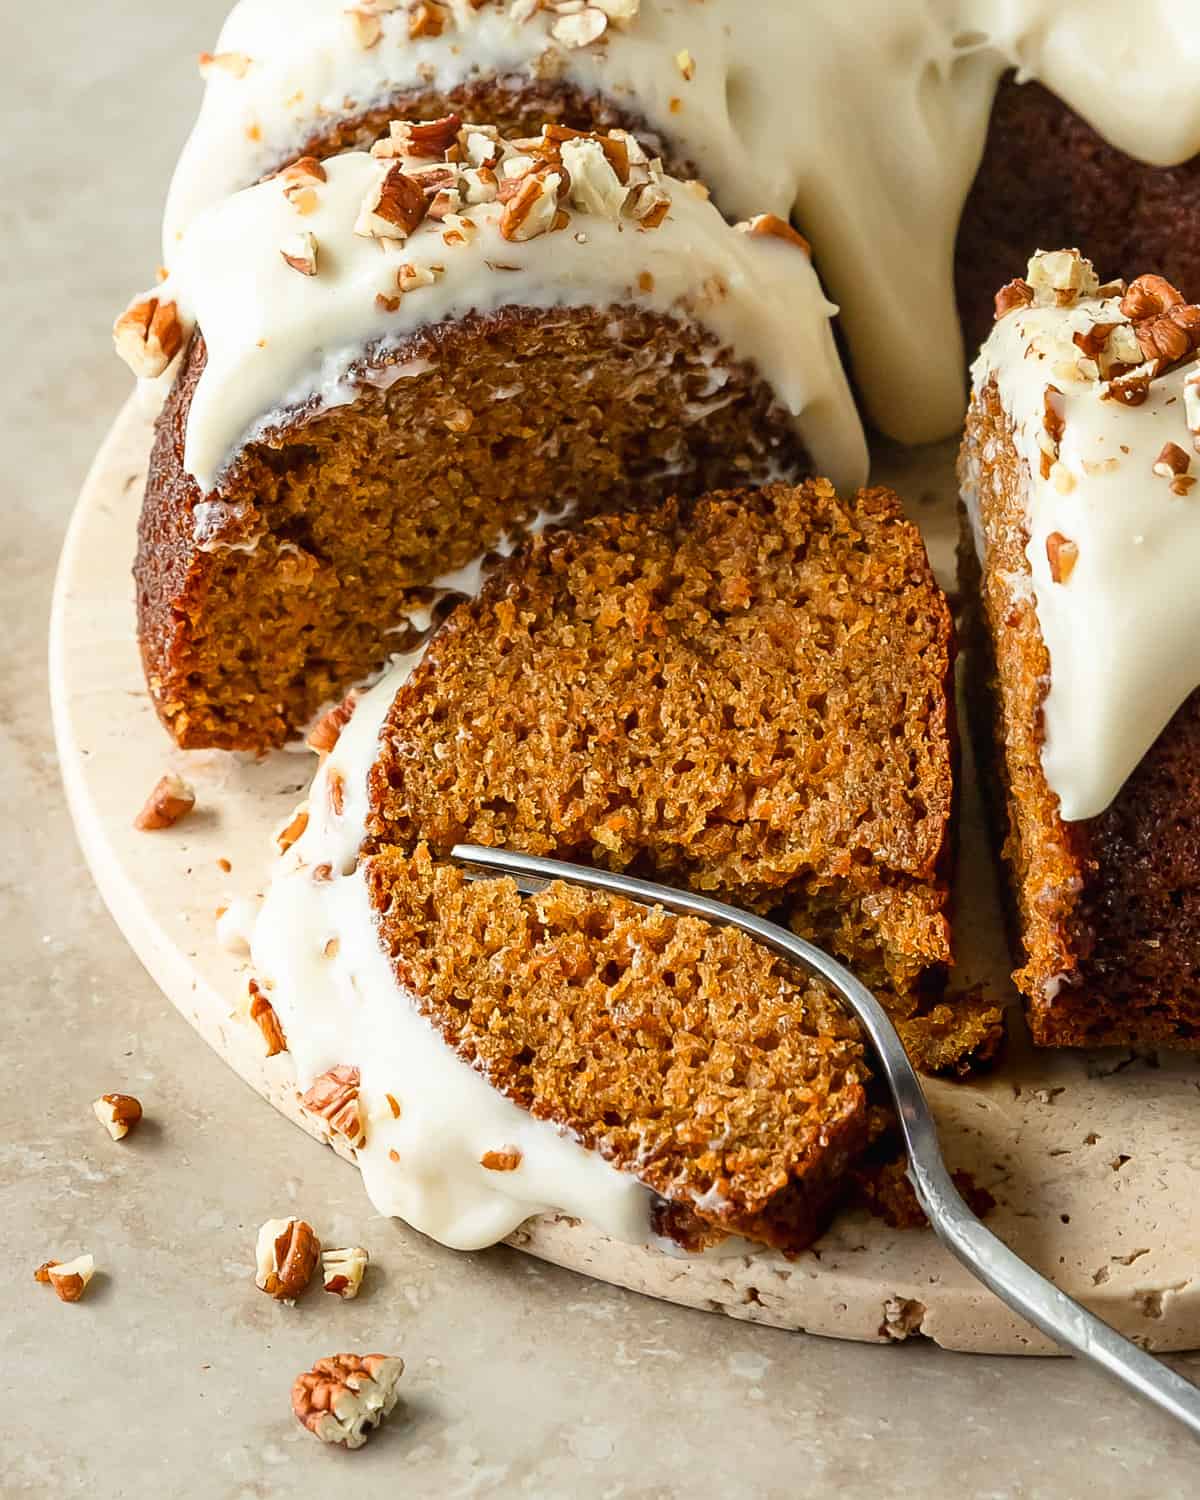 Carrot bundt cake is a perfectly moist carrot cake filled with freshly grated carrots and a blend of classic warming spices. Top this bundt carrot cake with a rich and tangy cream cheese glaze and crunchy pecans.  With its beautiful bakery worthy appearance and easy preparation, this carrot cake bundt cake is the perfect cake for all your holiday gatherings. 